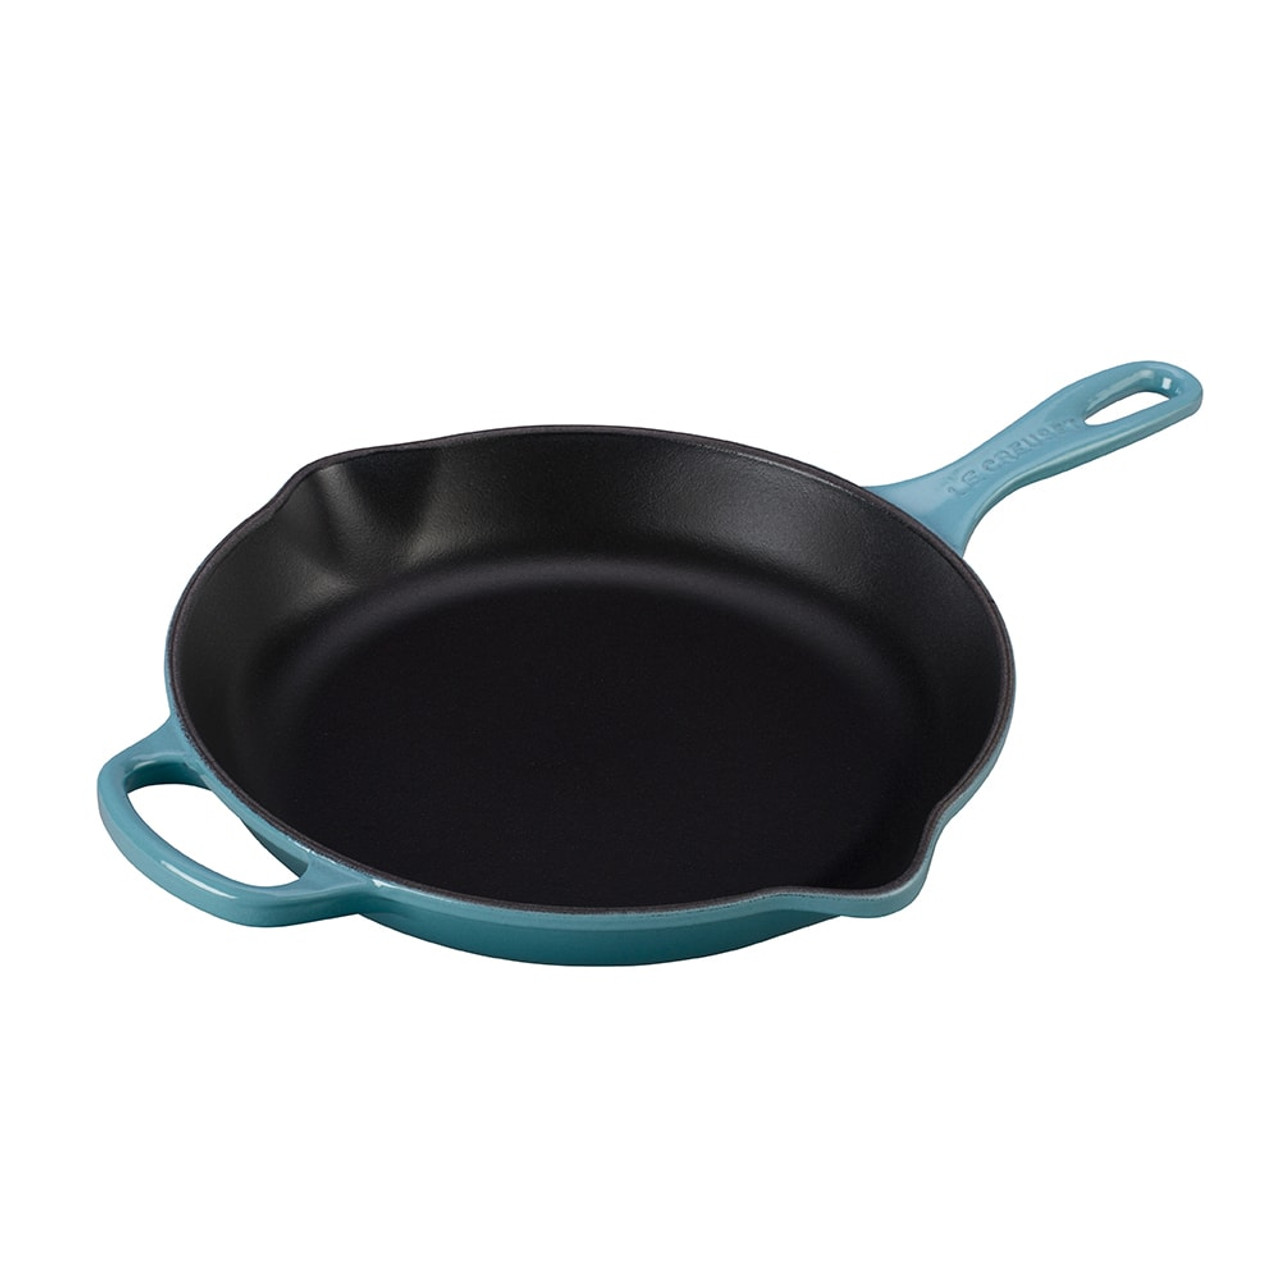 https://cdn11.bigcommerce.com/s-hccytny0od/images/stencil/1280x1280/products/1895/6452/le-creuset-signature-skillet-caribbean-10in__96857.1628778255.jpg?c=2?imbypass=on